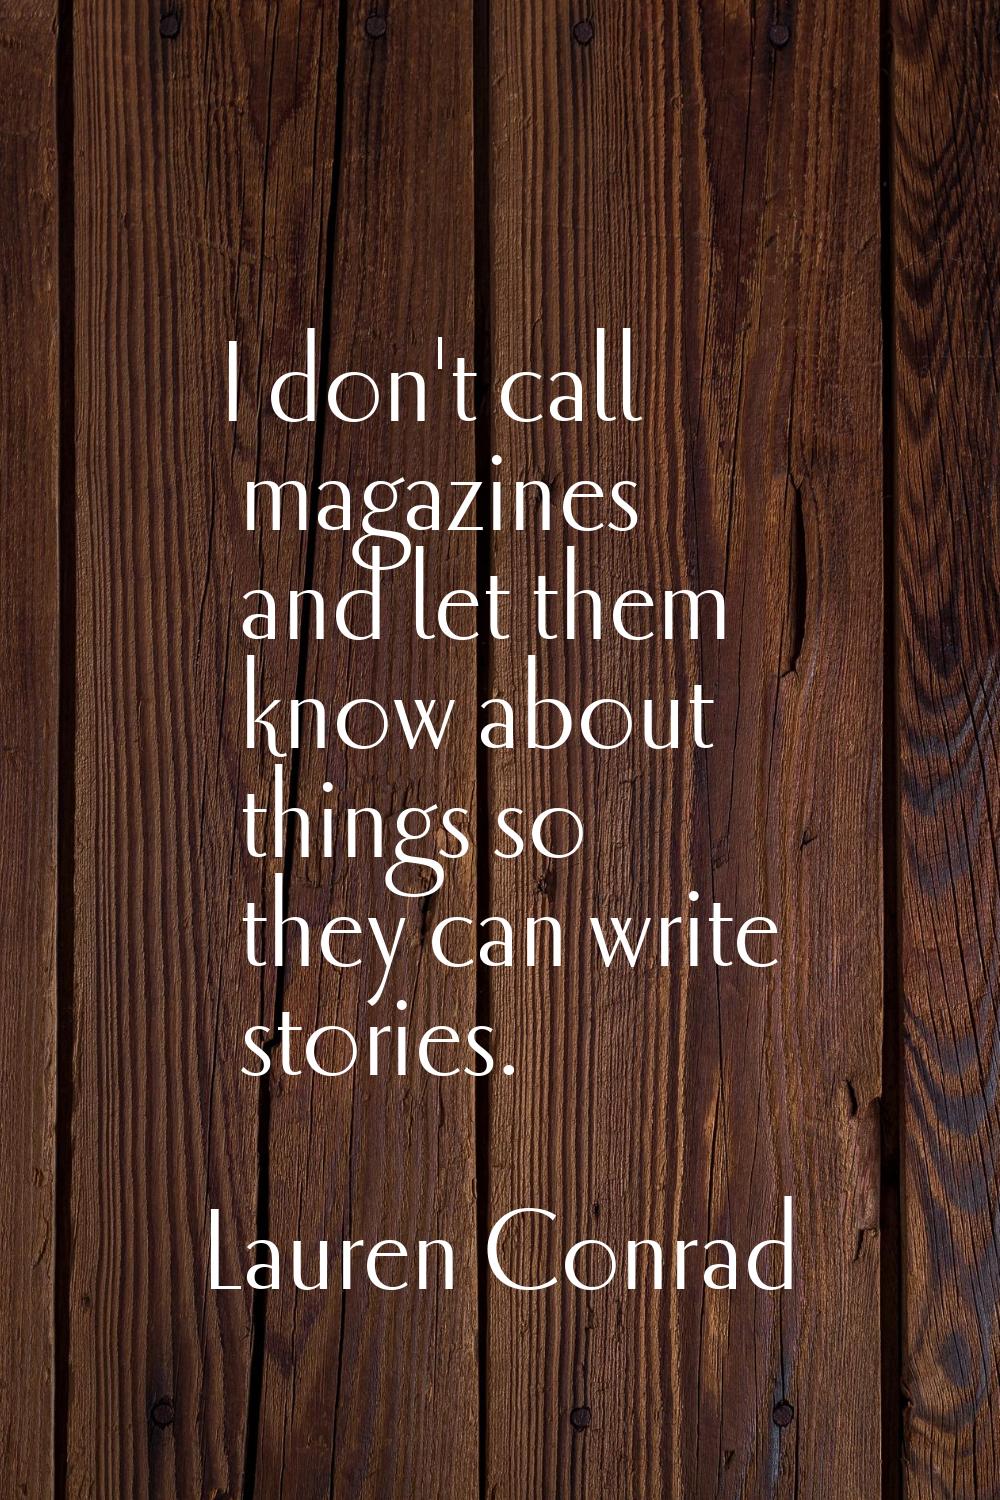 I don't call magazines and let them know about things so they can write stories.